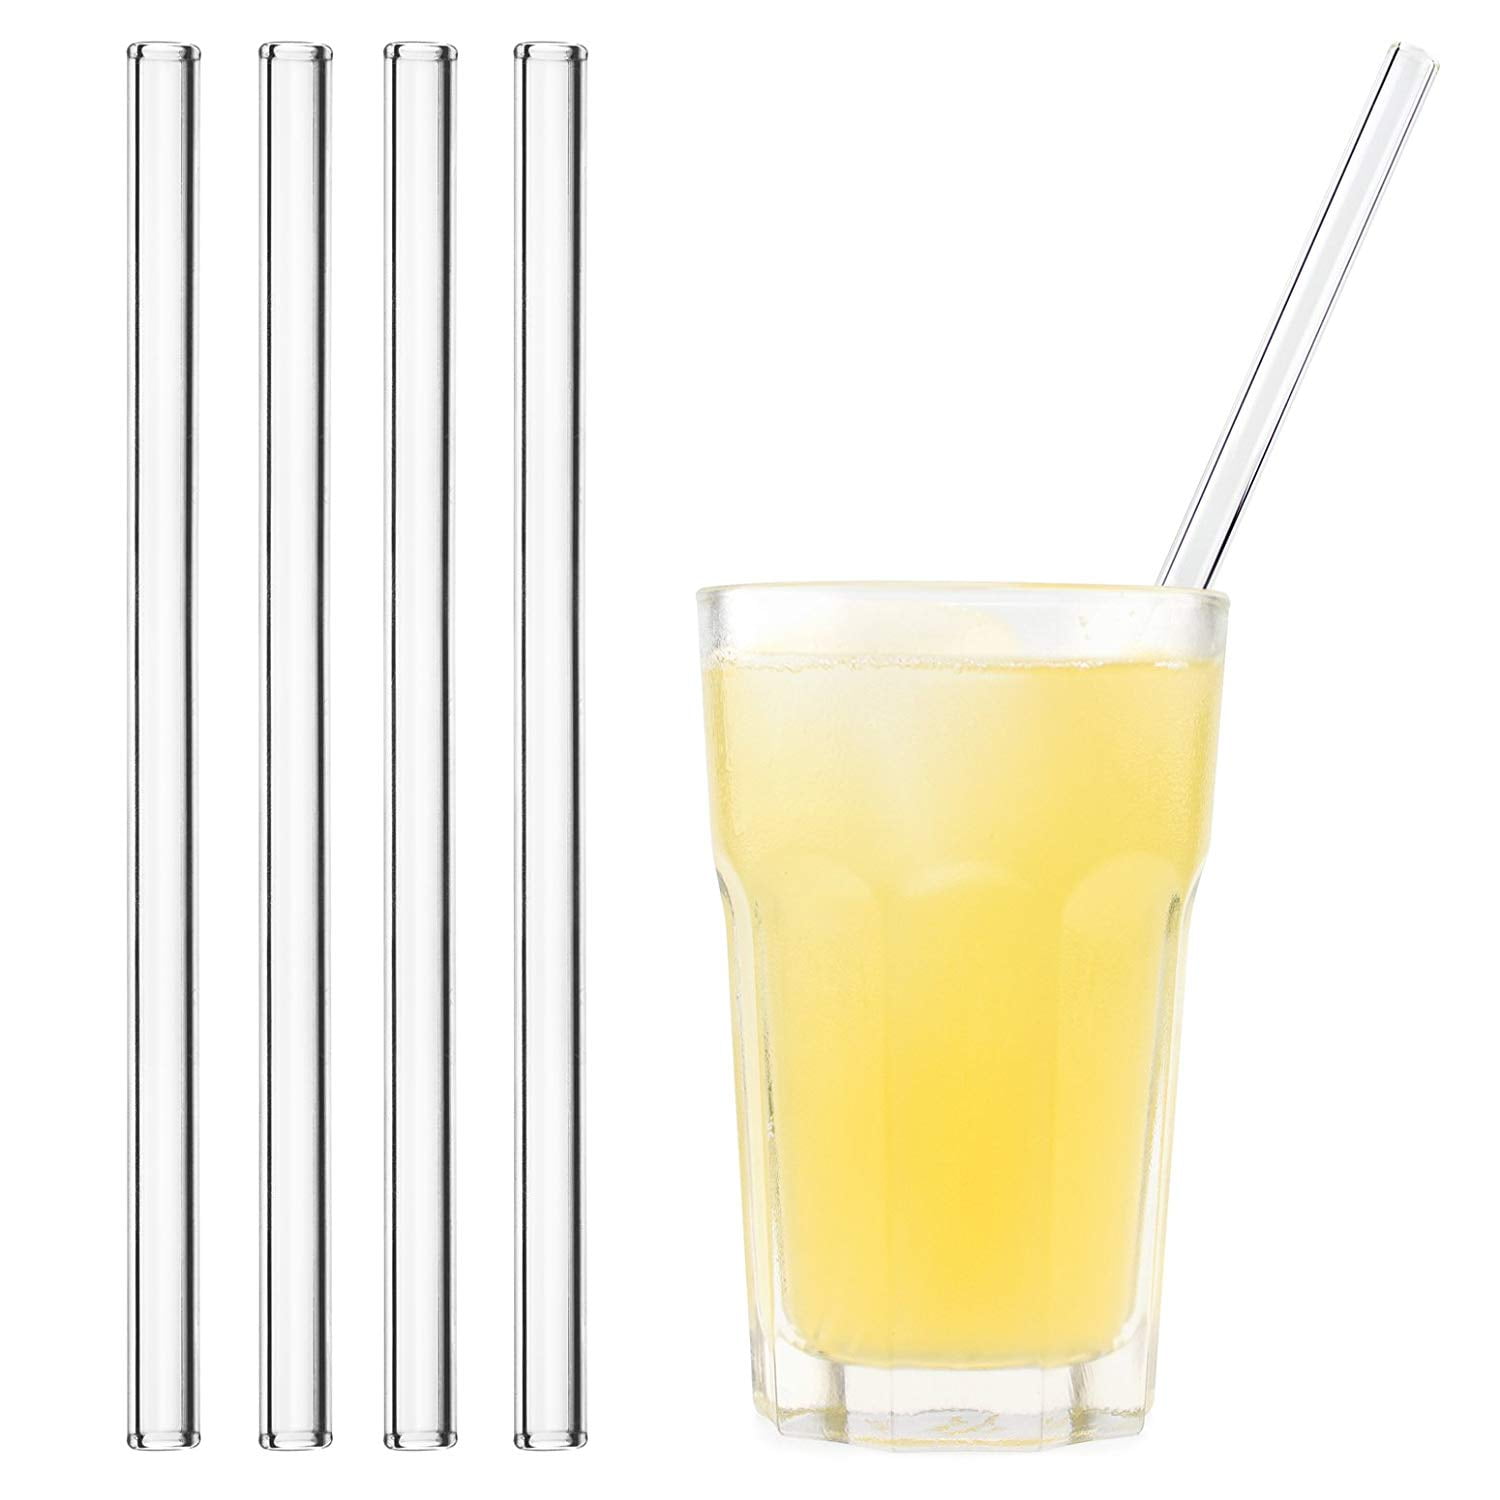 LIFEHIM Reusable Straws Travel Pack: Multisize Glass Straws with Colored  Tips Skinny Glass Straws 8mm Borosilicate Glass Straws for Drinking